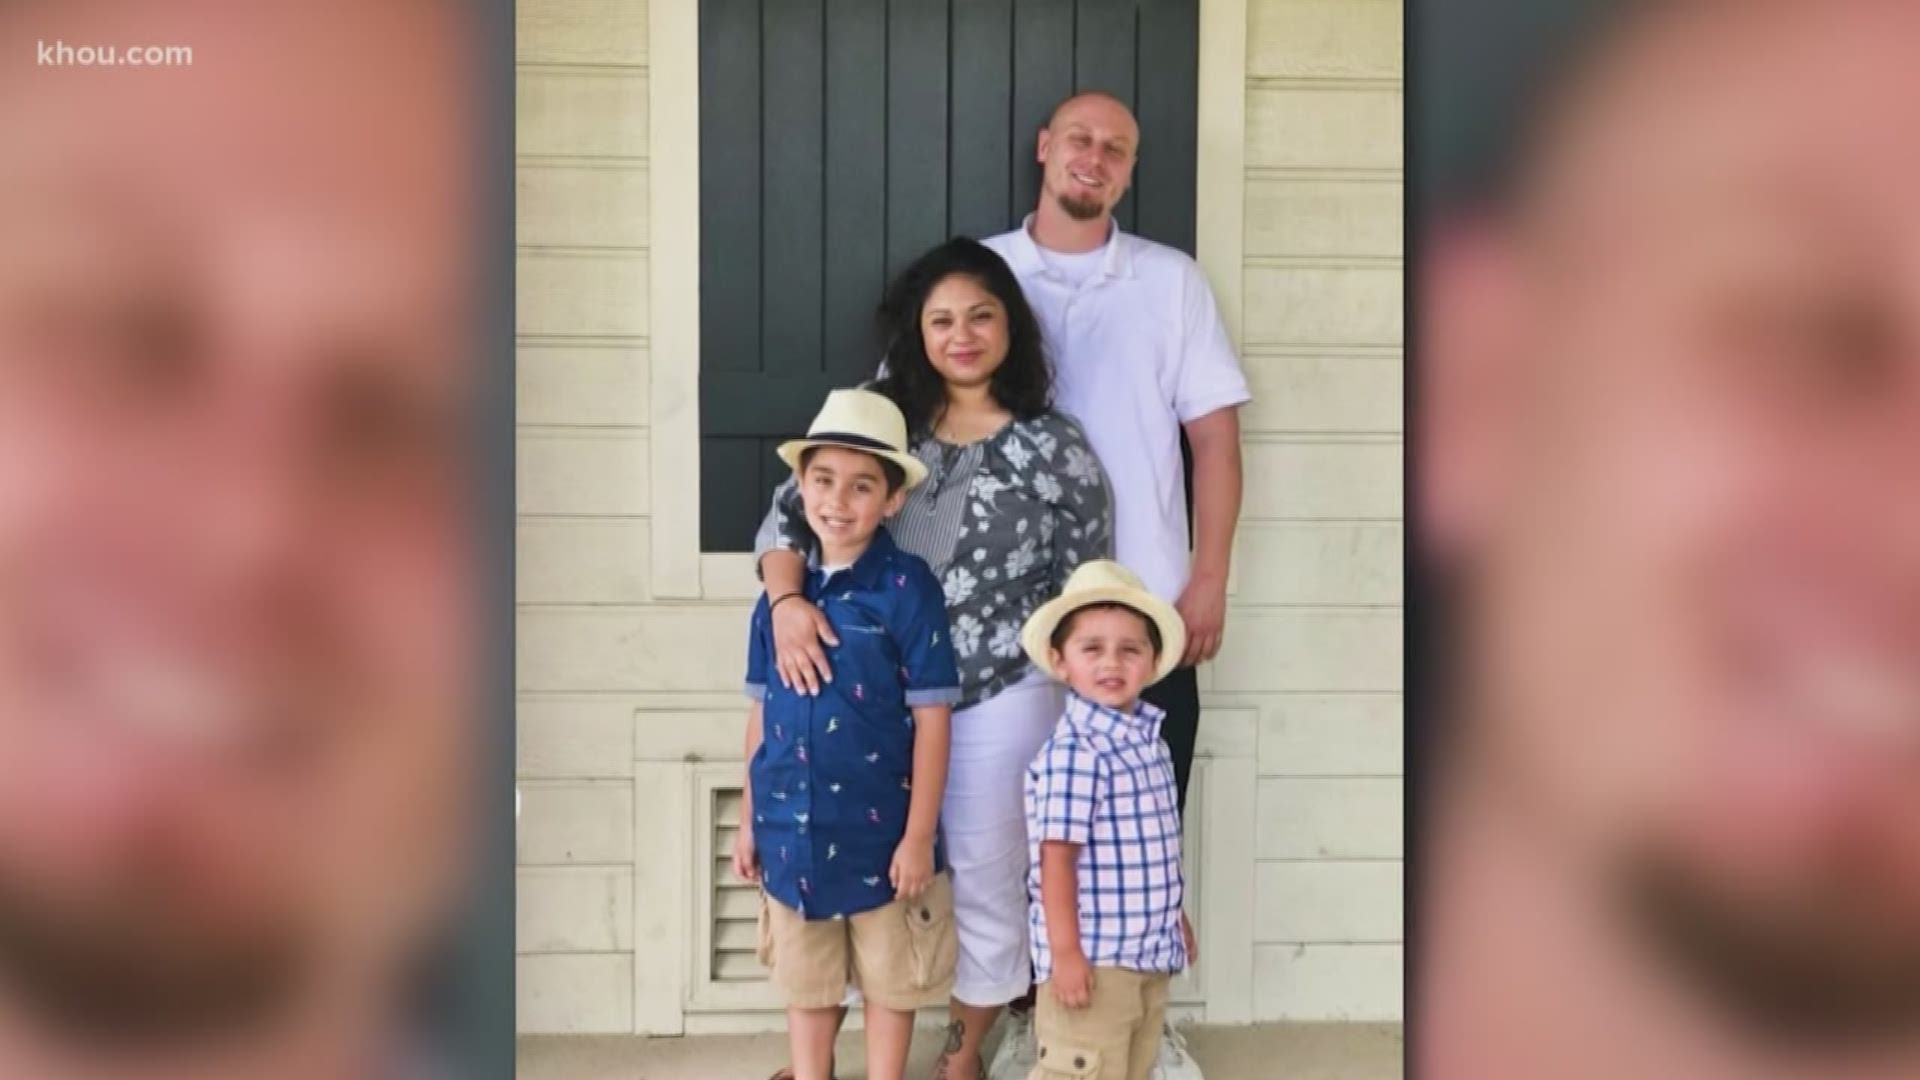 In a heartbreaking interview, the widow of a man shot and killed in a road rage incident talks to KHOU 11 about witnessing her husband's murder.